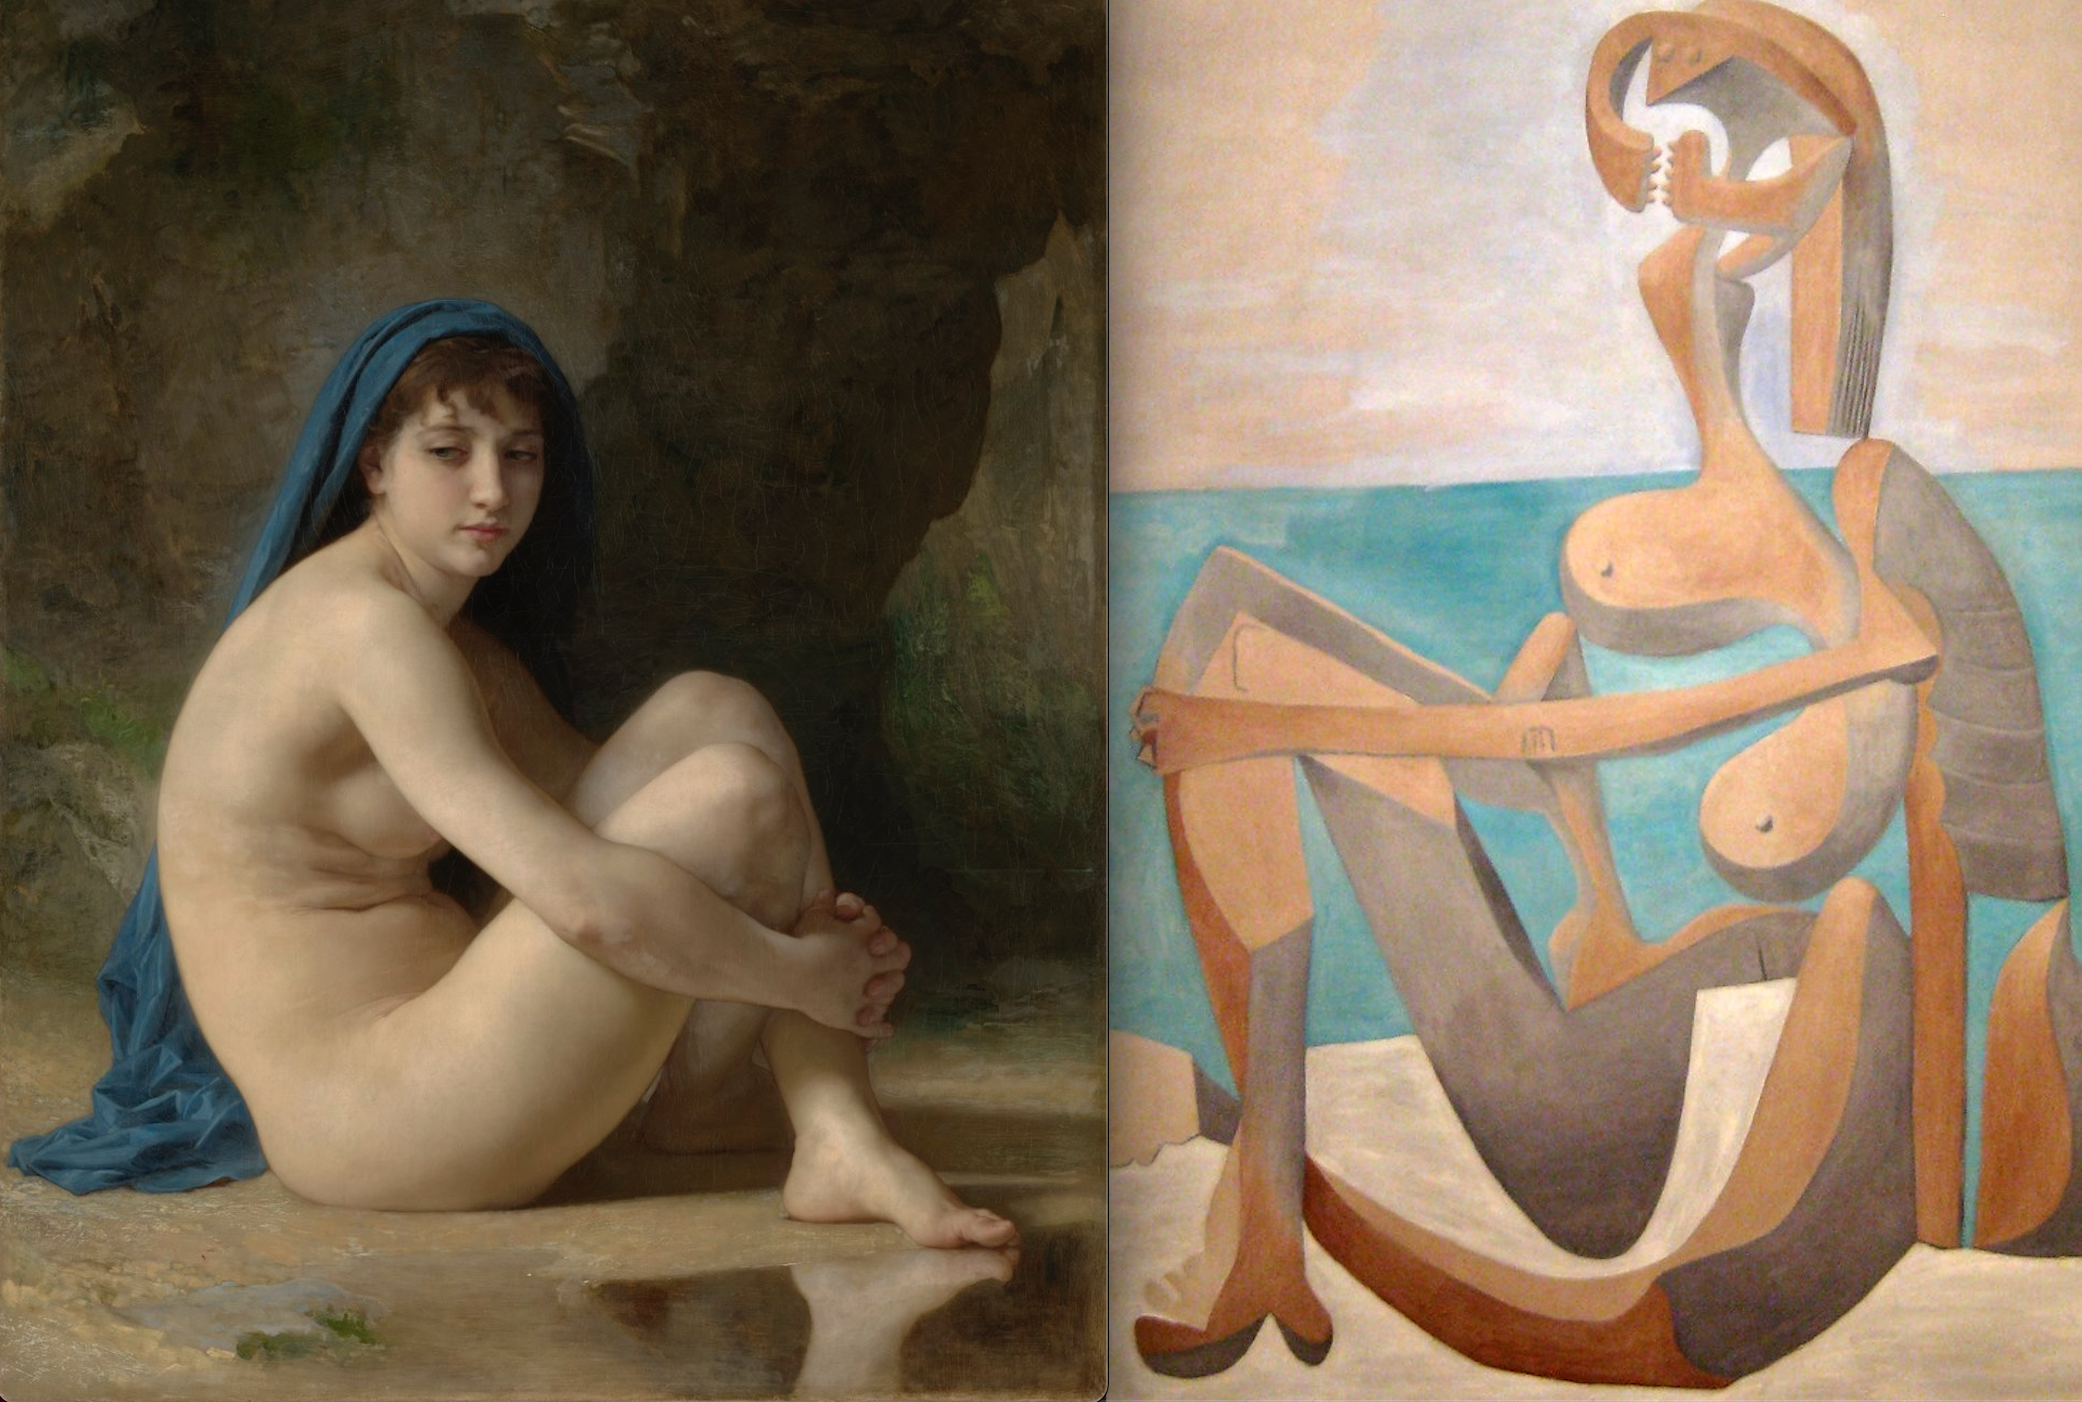 Bather and Baigneuse